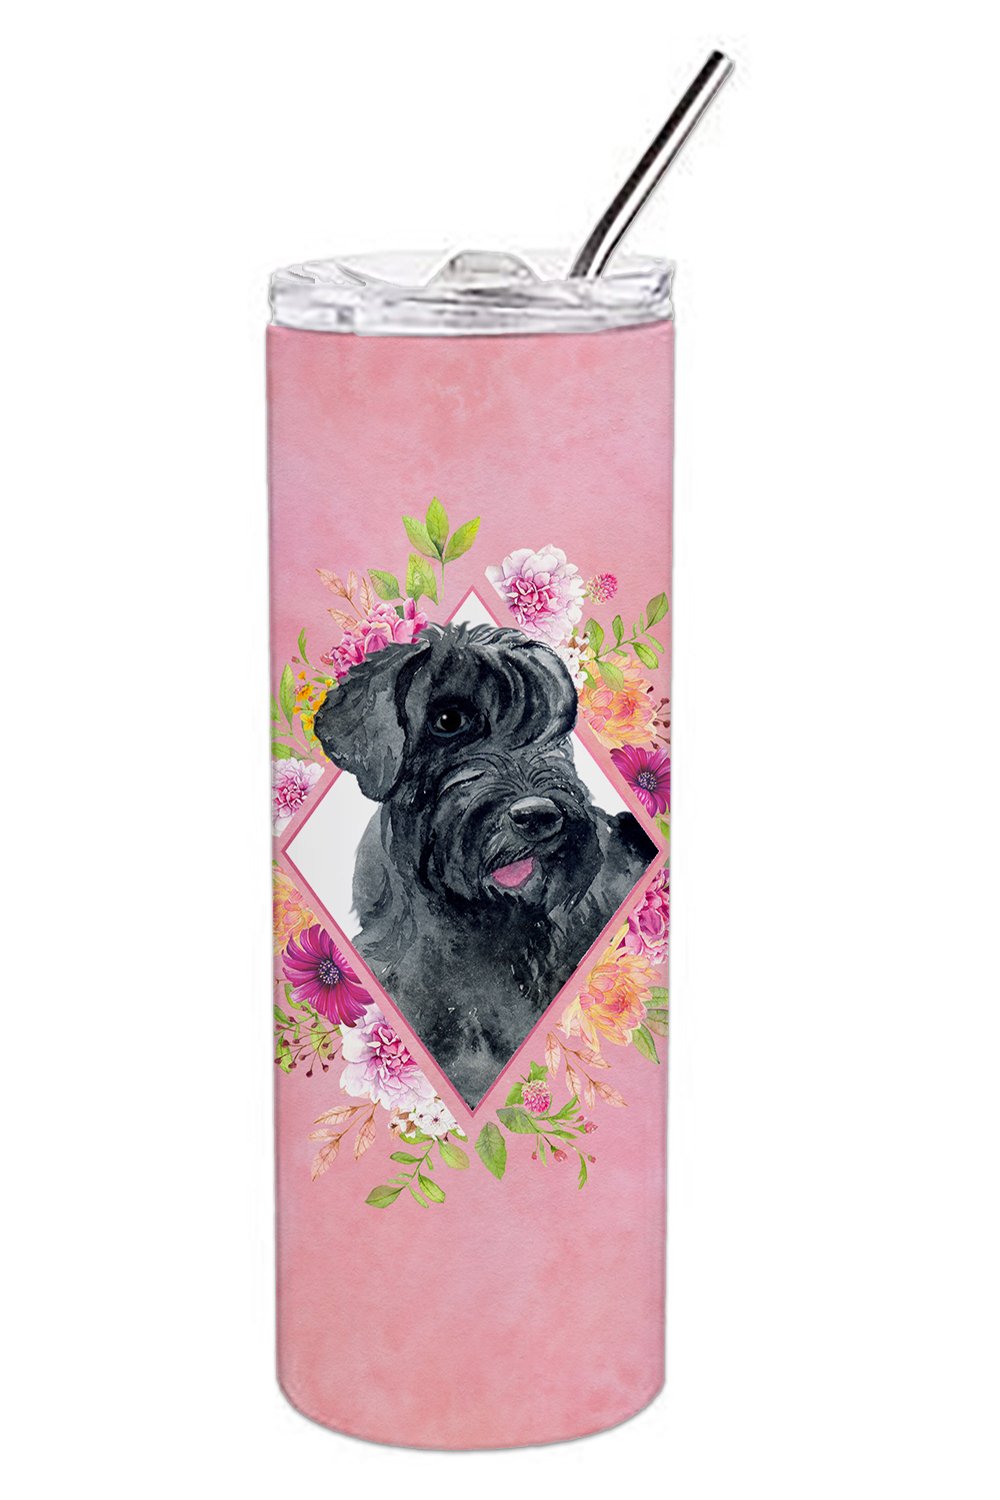 Giant Schnauzer Pink Flowers Double Walled Stainless Steel 20 oz Skinny Tumbler CK4178TBL20 by Caroline's Treasures